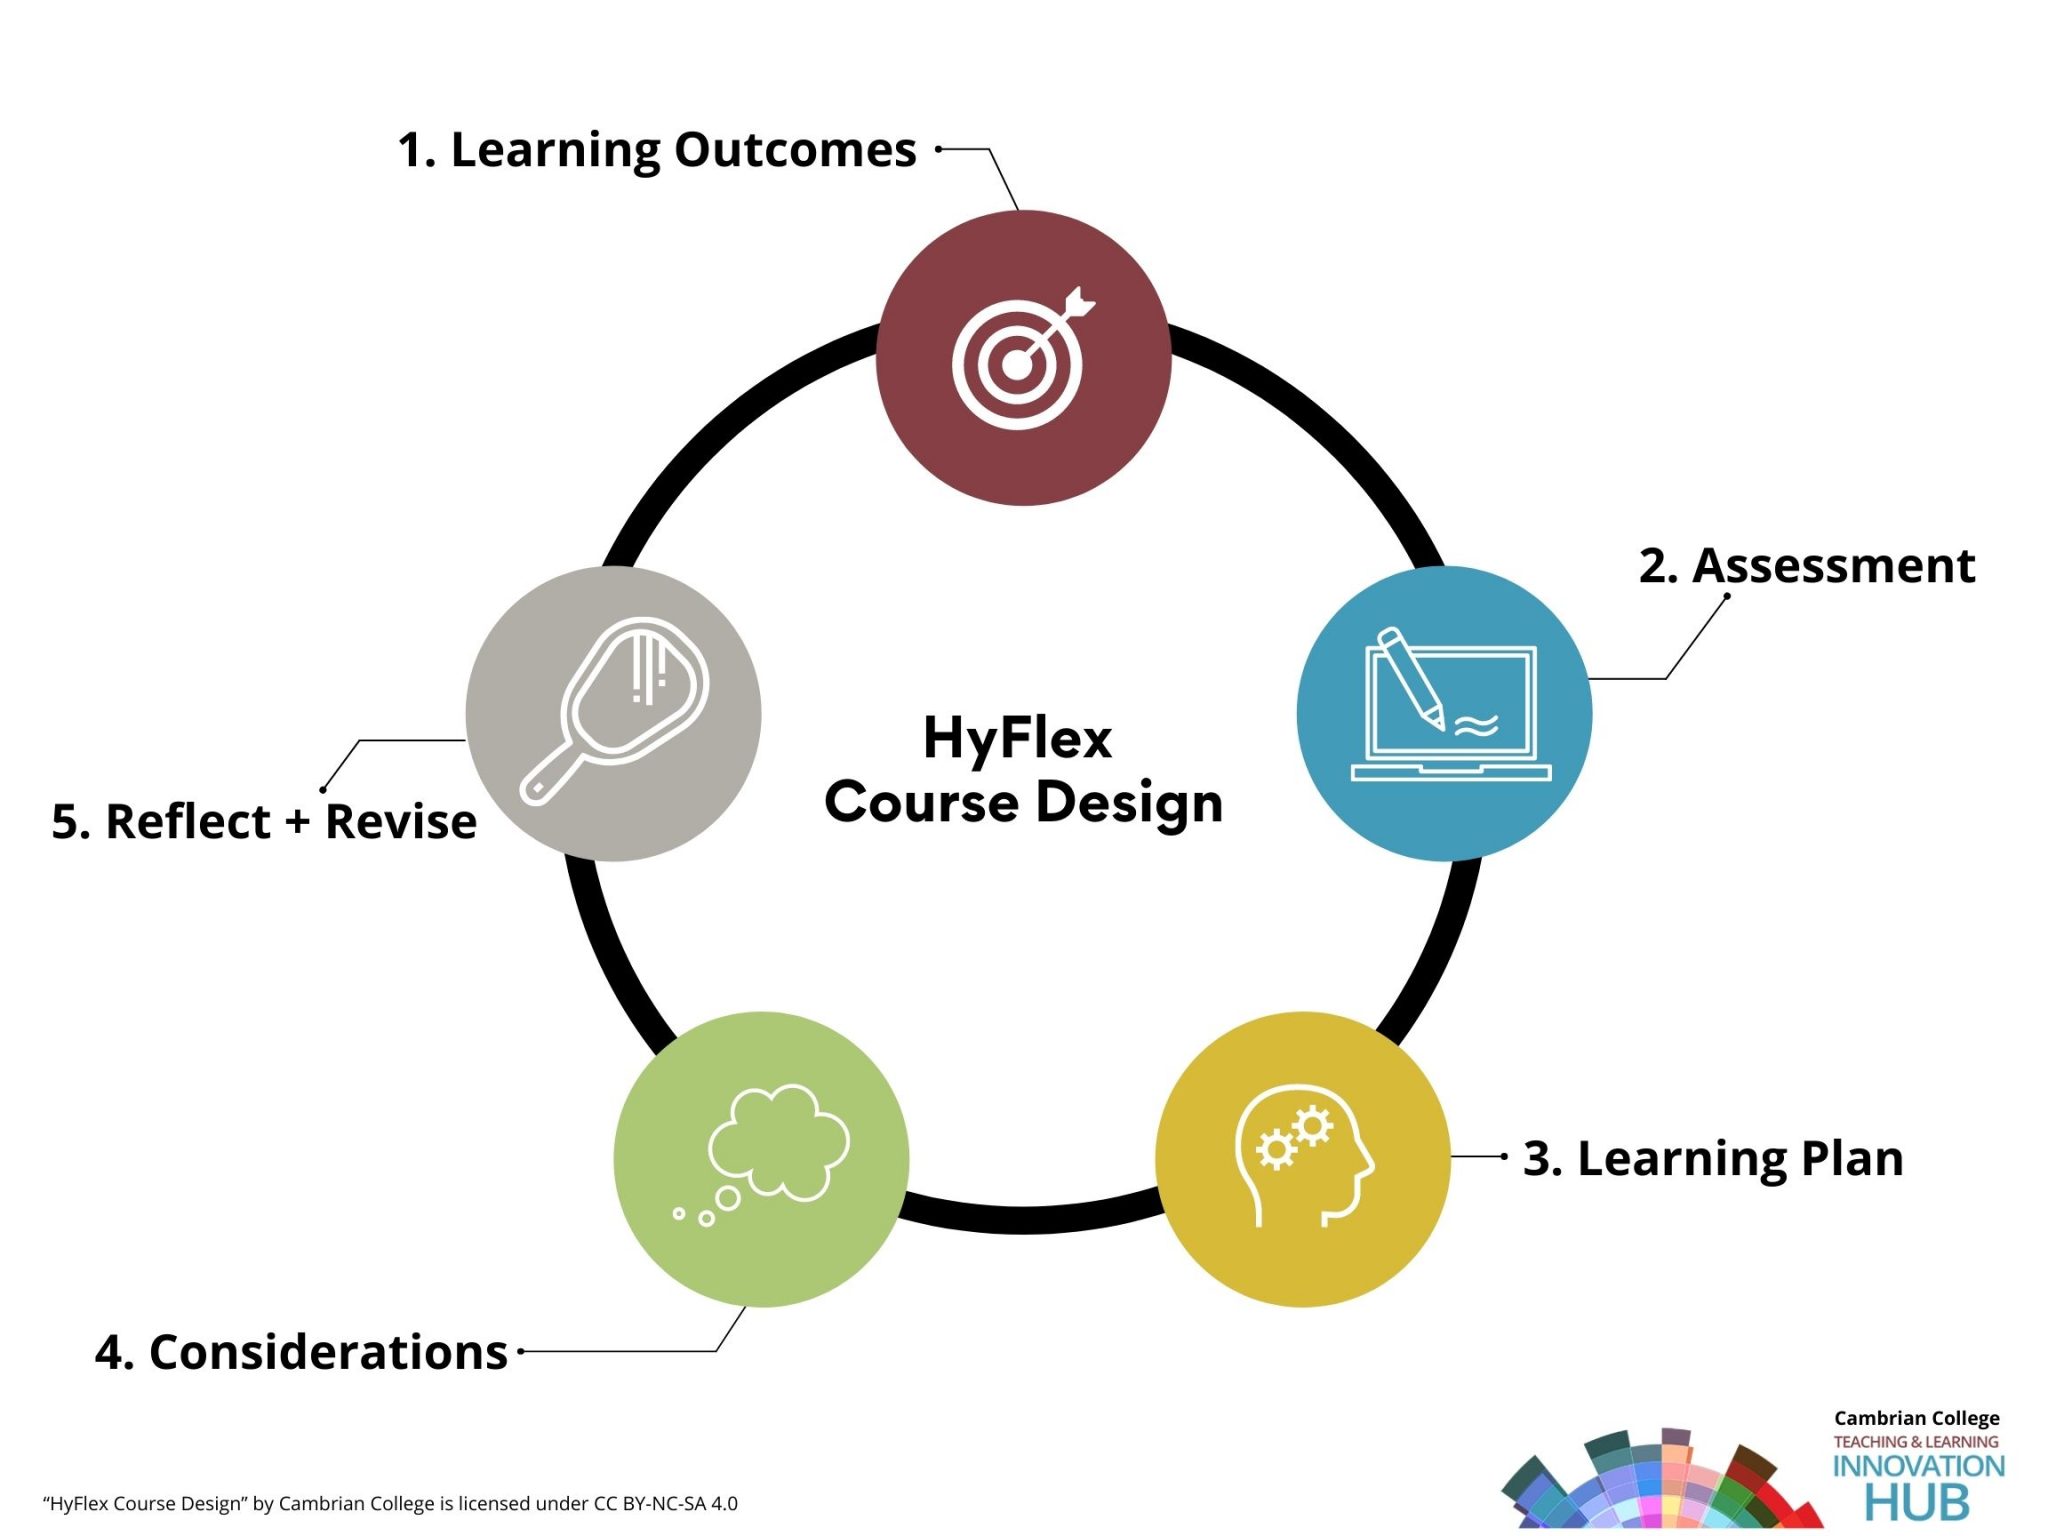 hyflex course design process: learnign outcomes, assessment, learning plan, considerations, and reflect + revise